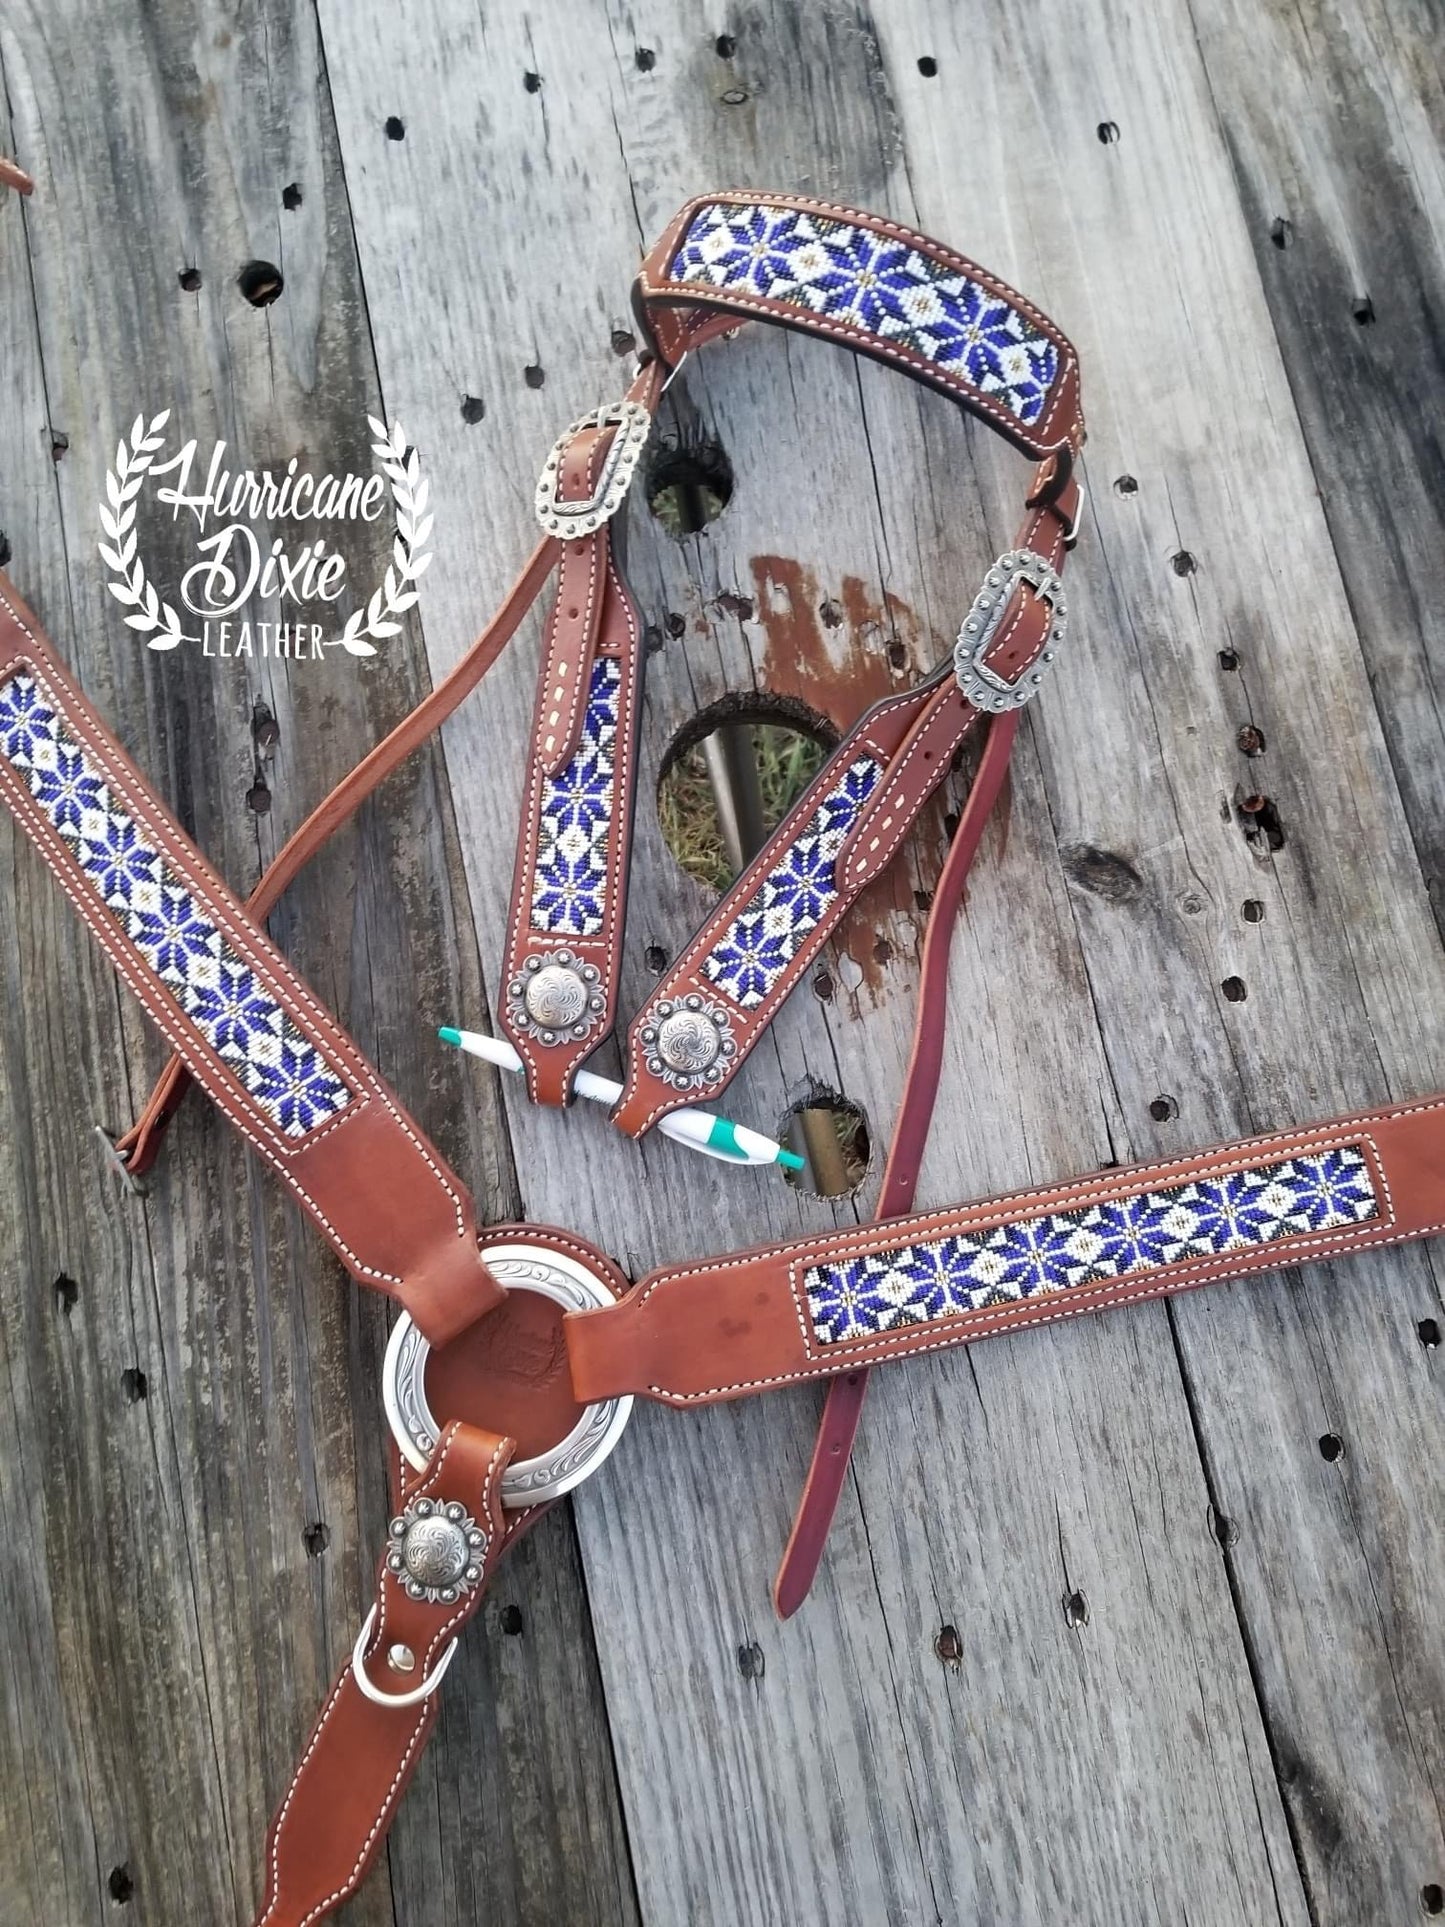 Blue And White Tack Set